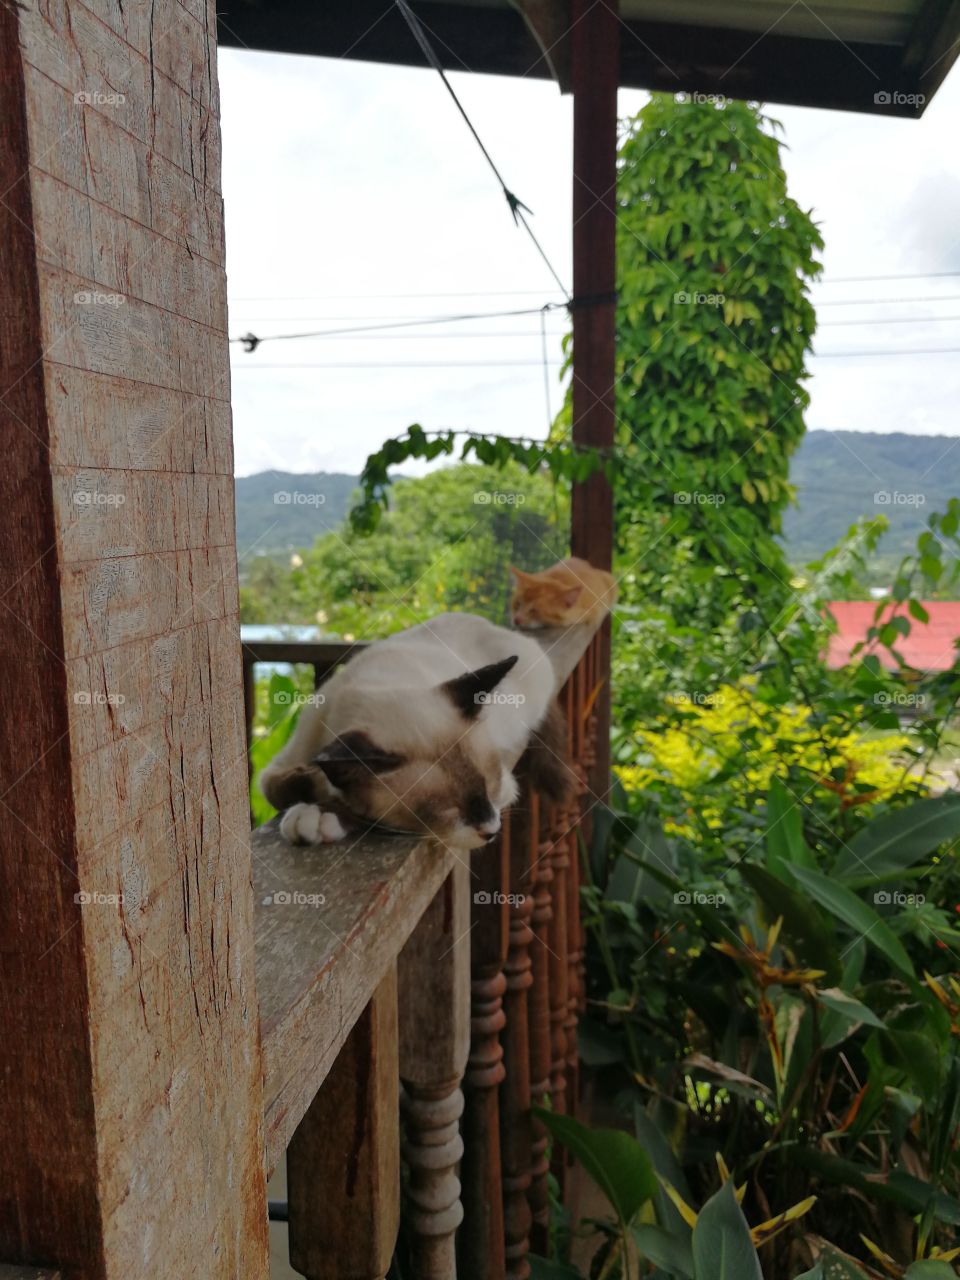 Two cats sleeping on a balcony fence with lush scenery behind